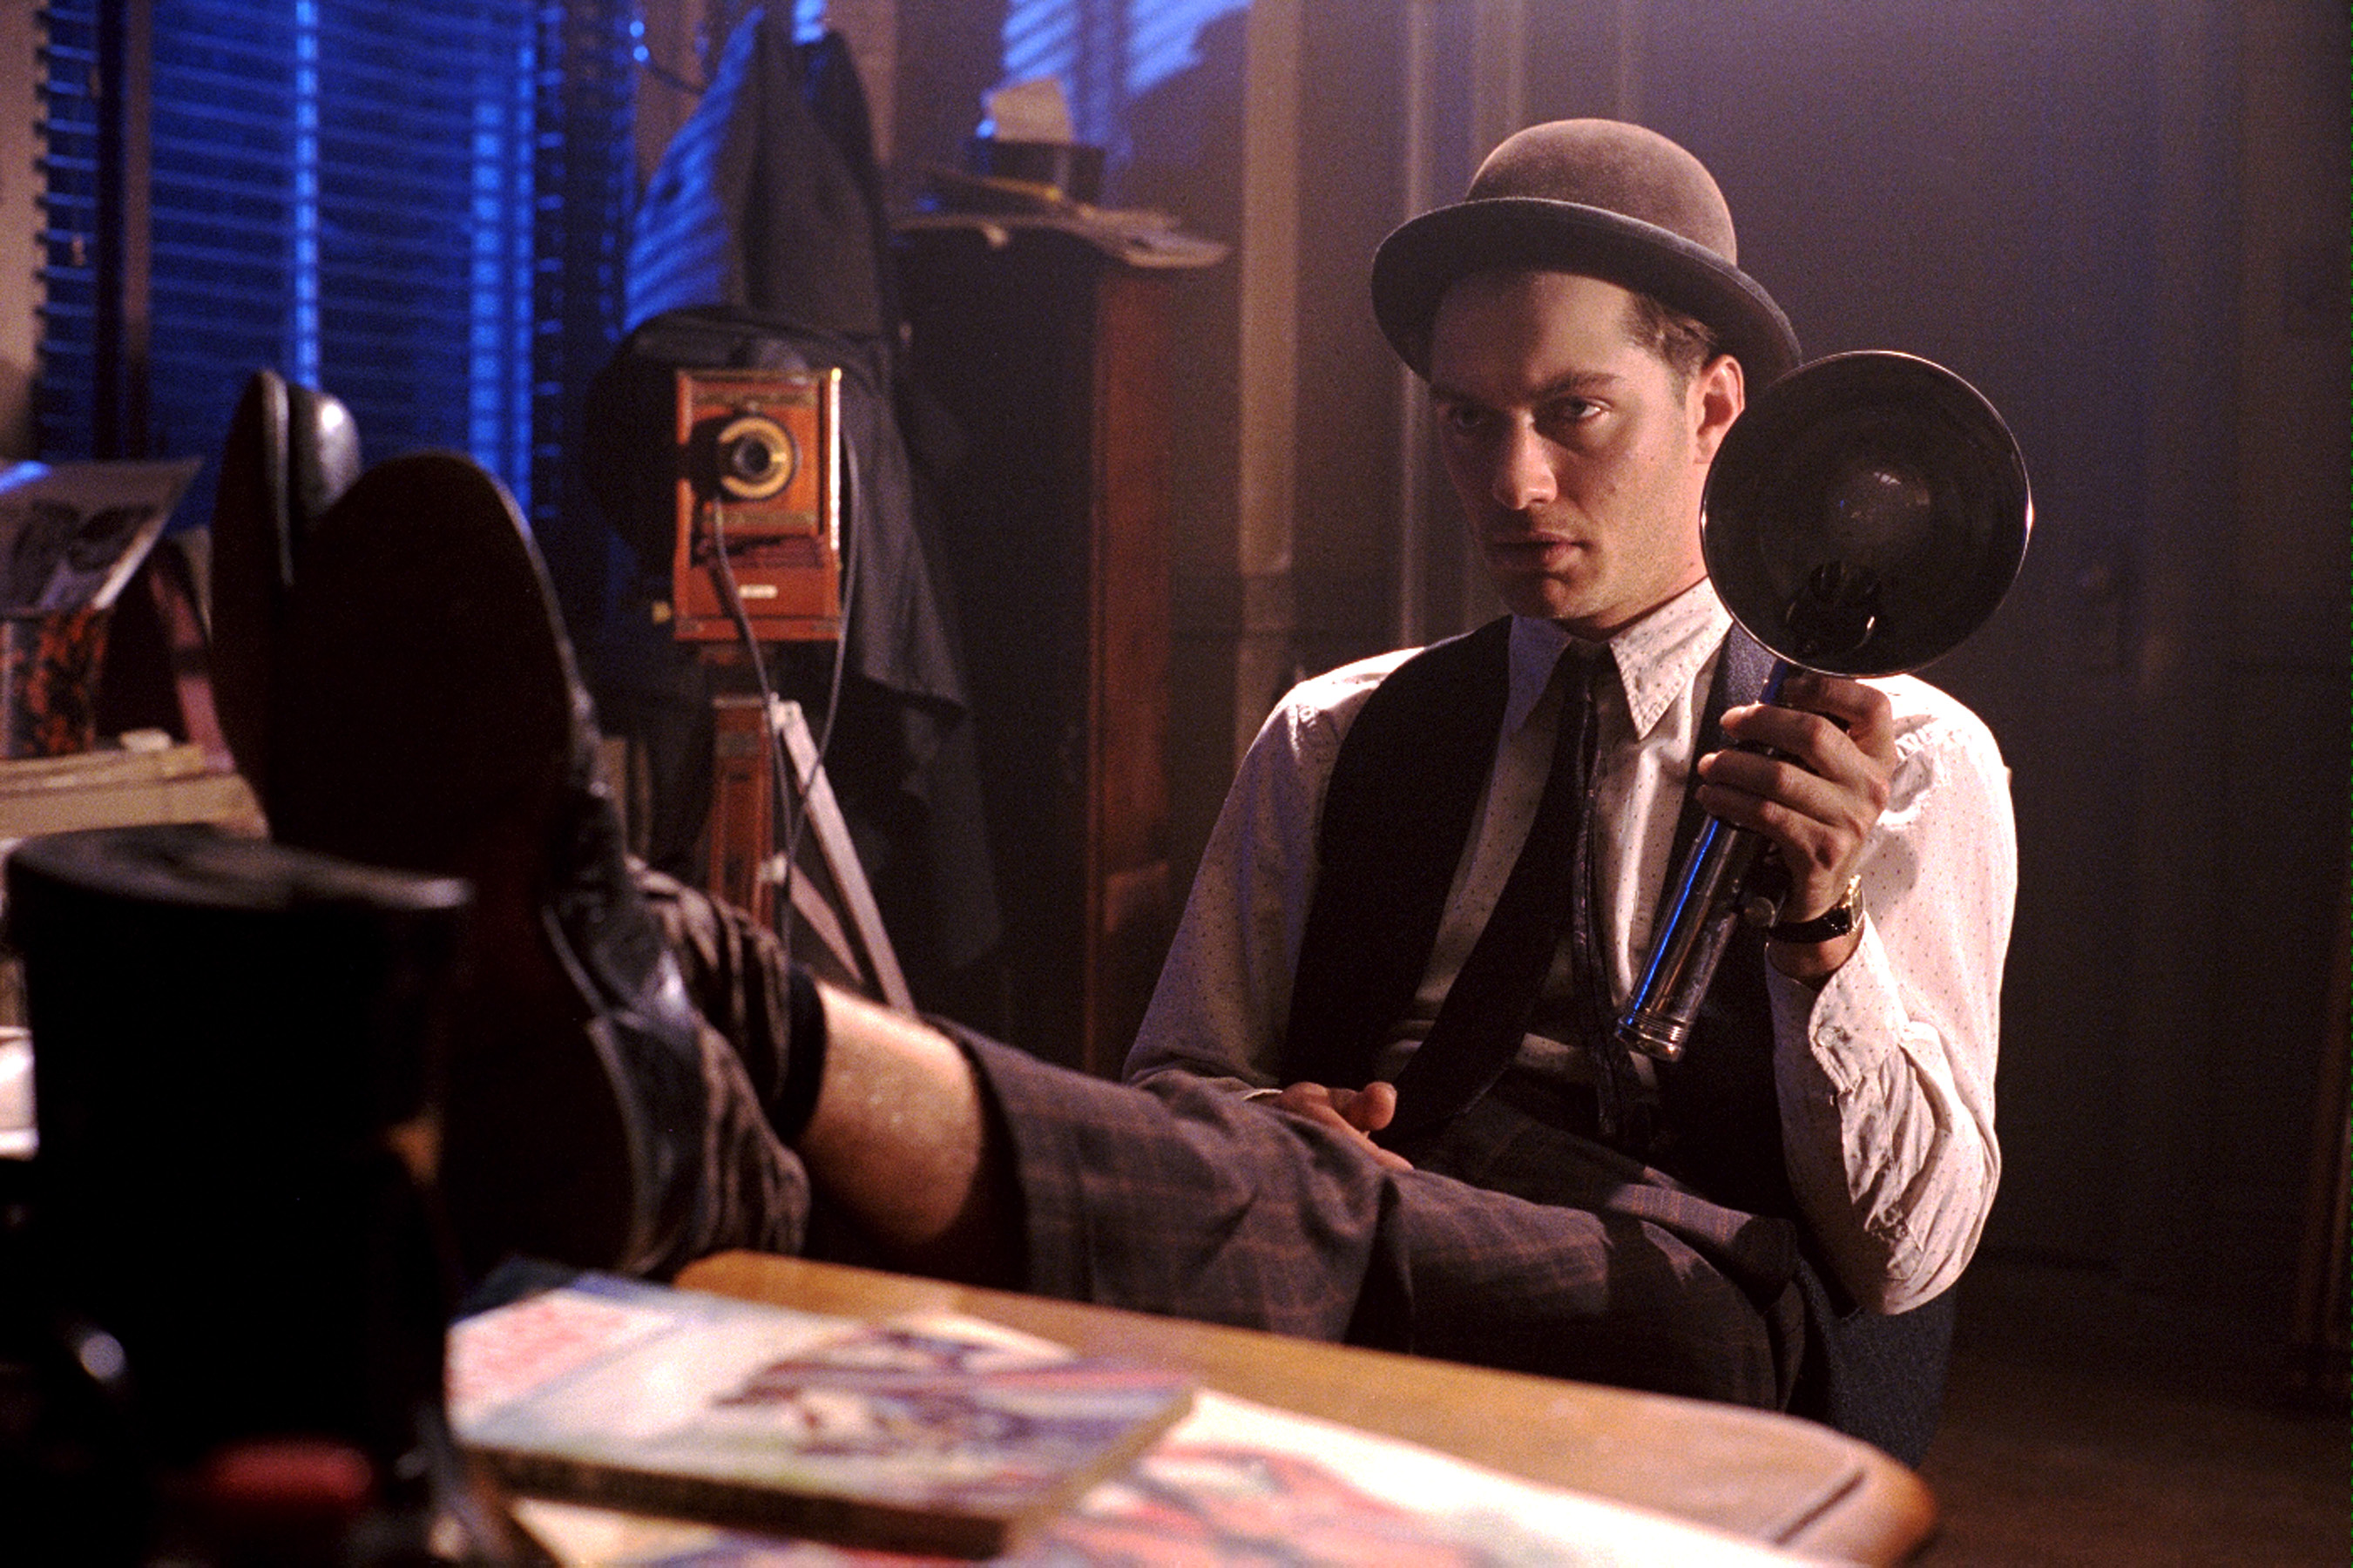 A man in a bowling hat rests his legs on a desk.